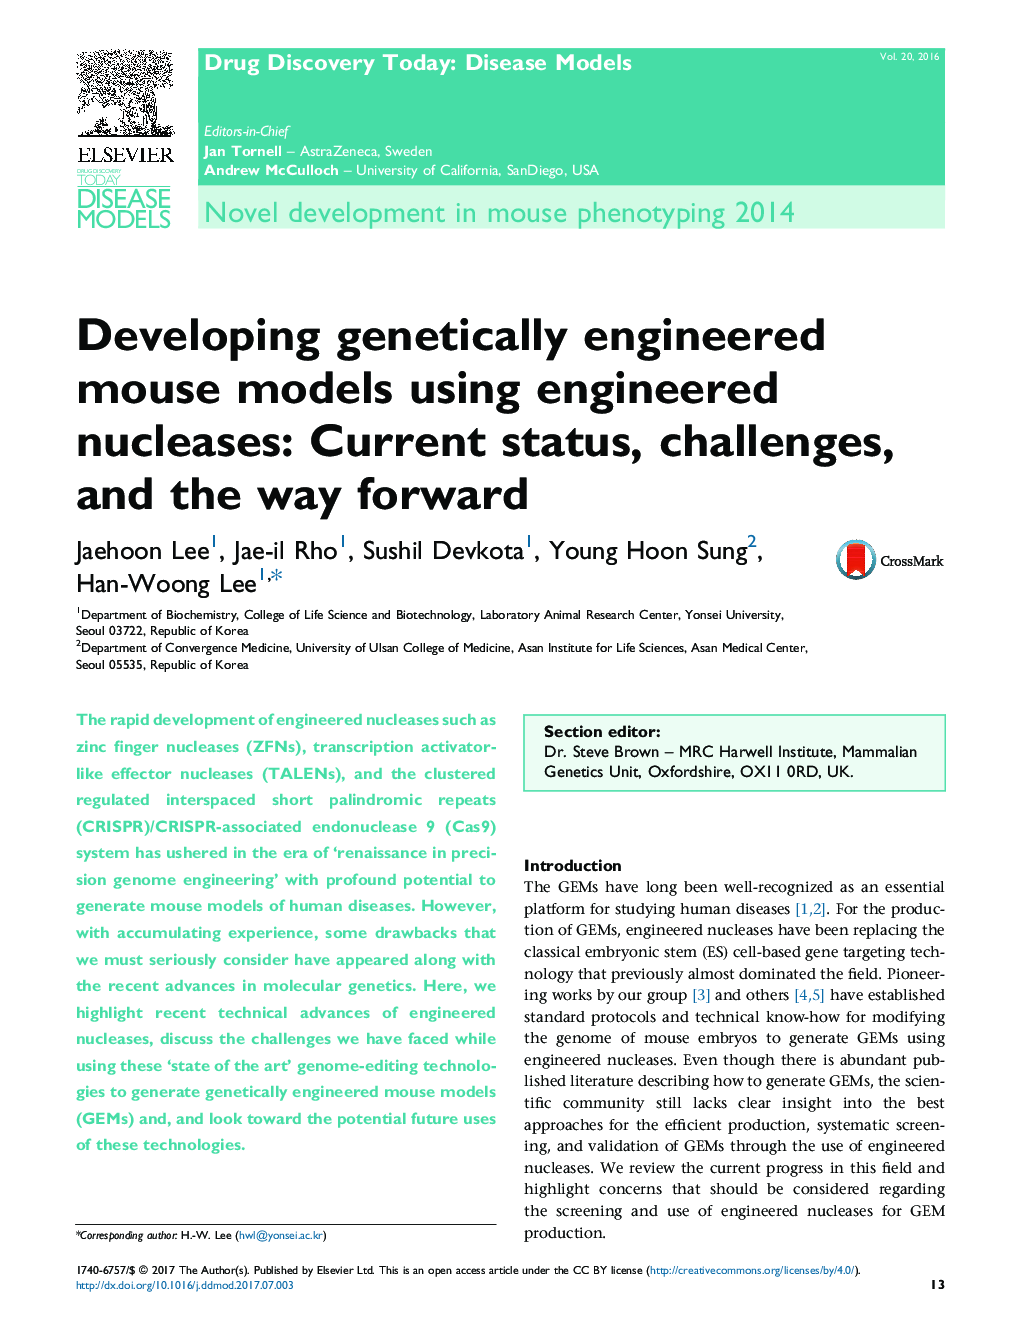 Developing genetically engineered mouse models using engineered nucleases: Current status, challenges, and the way forward